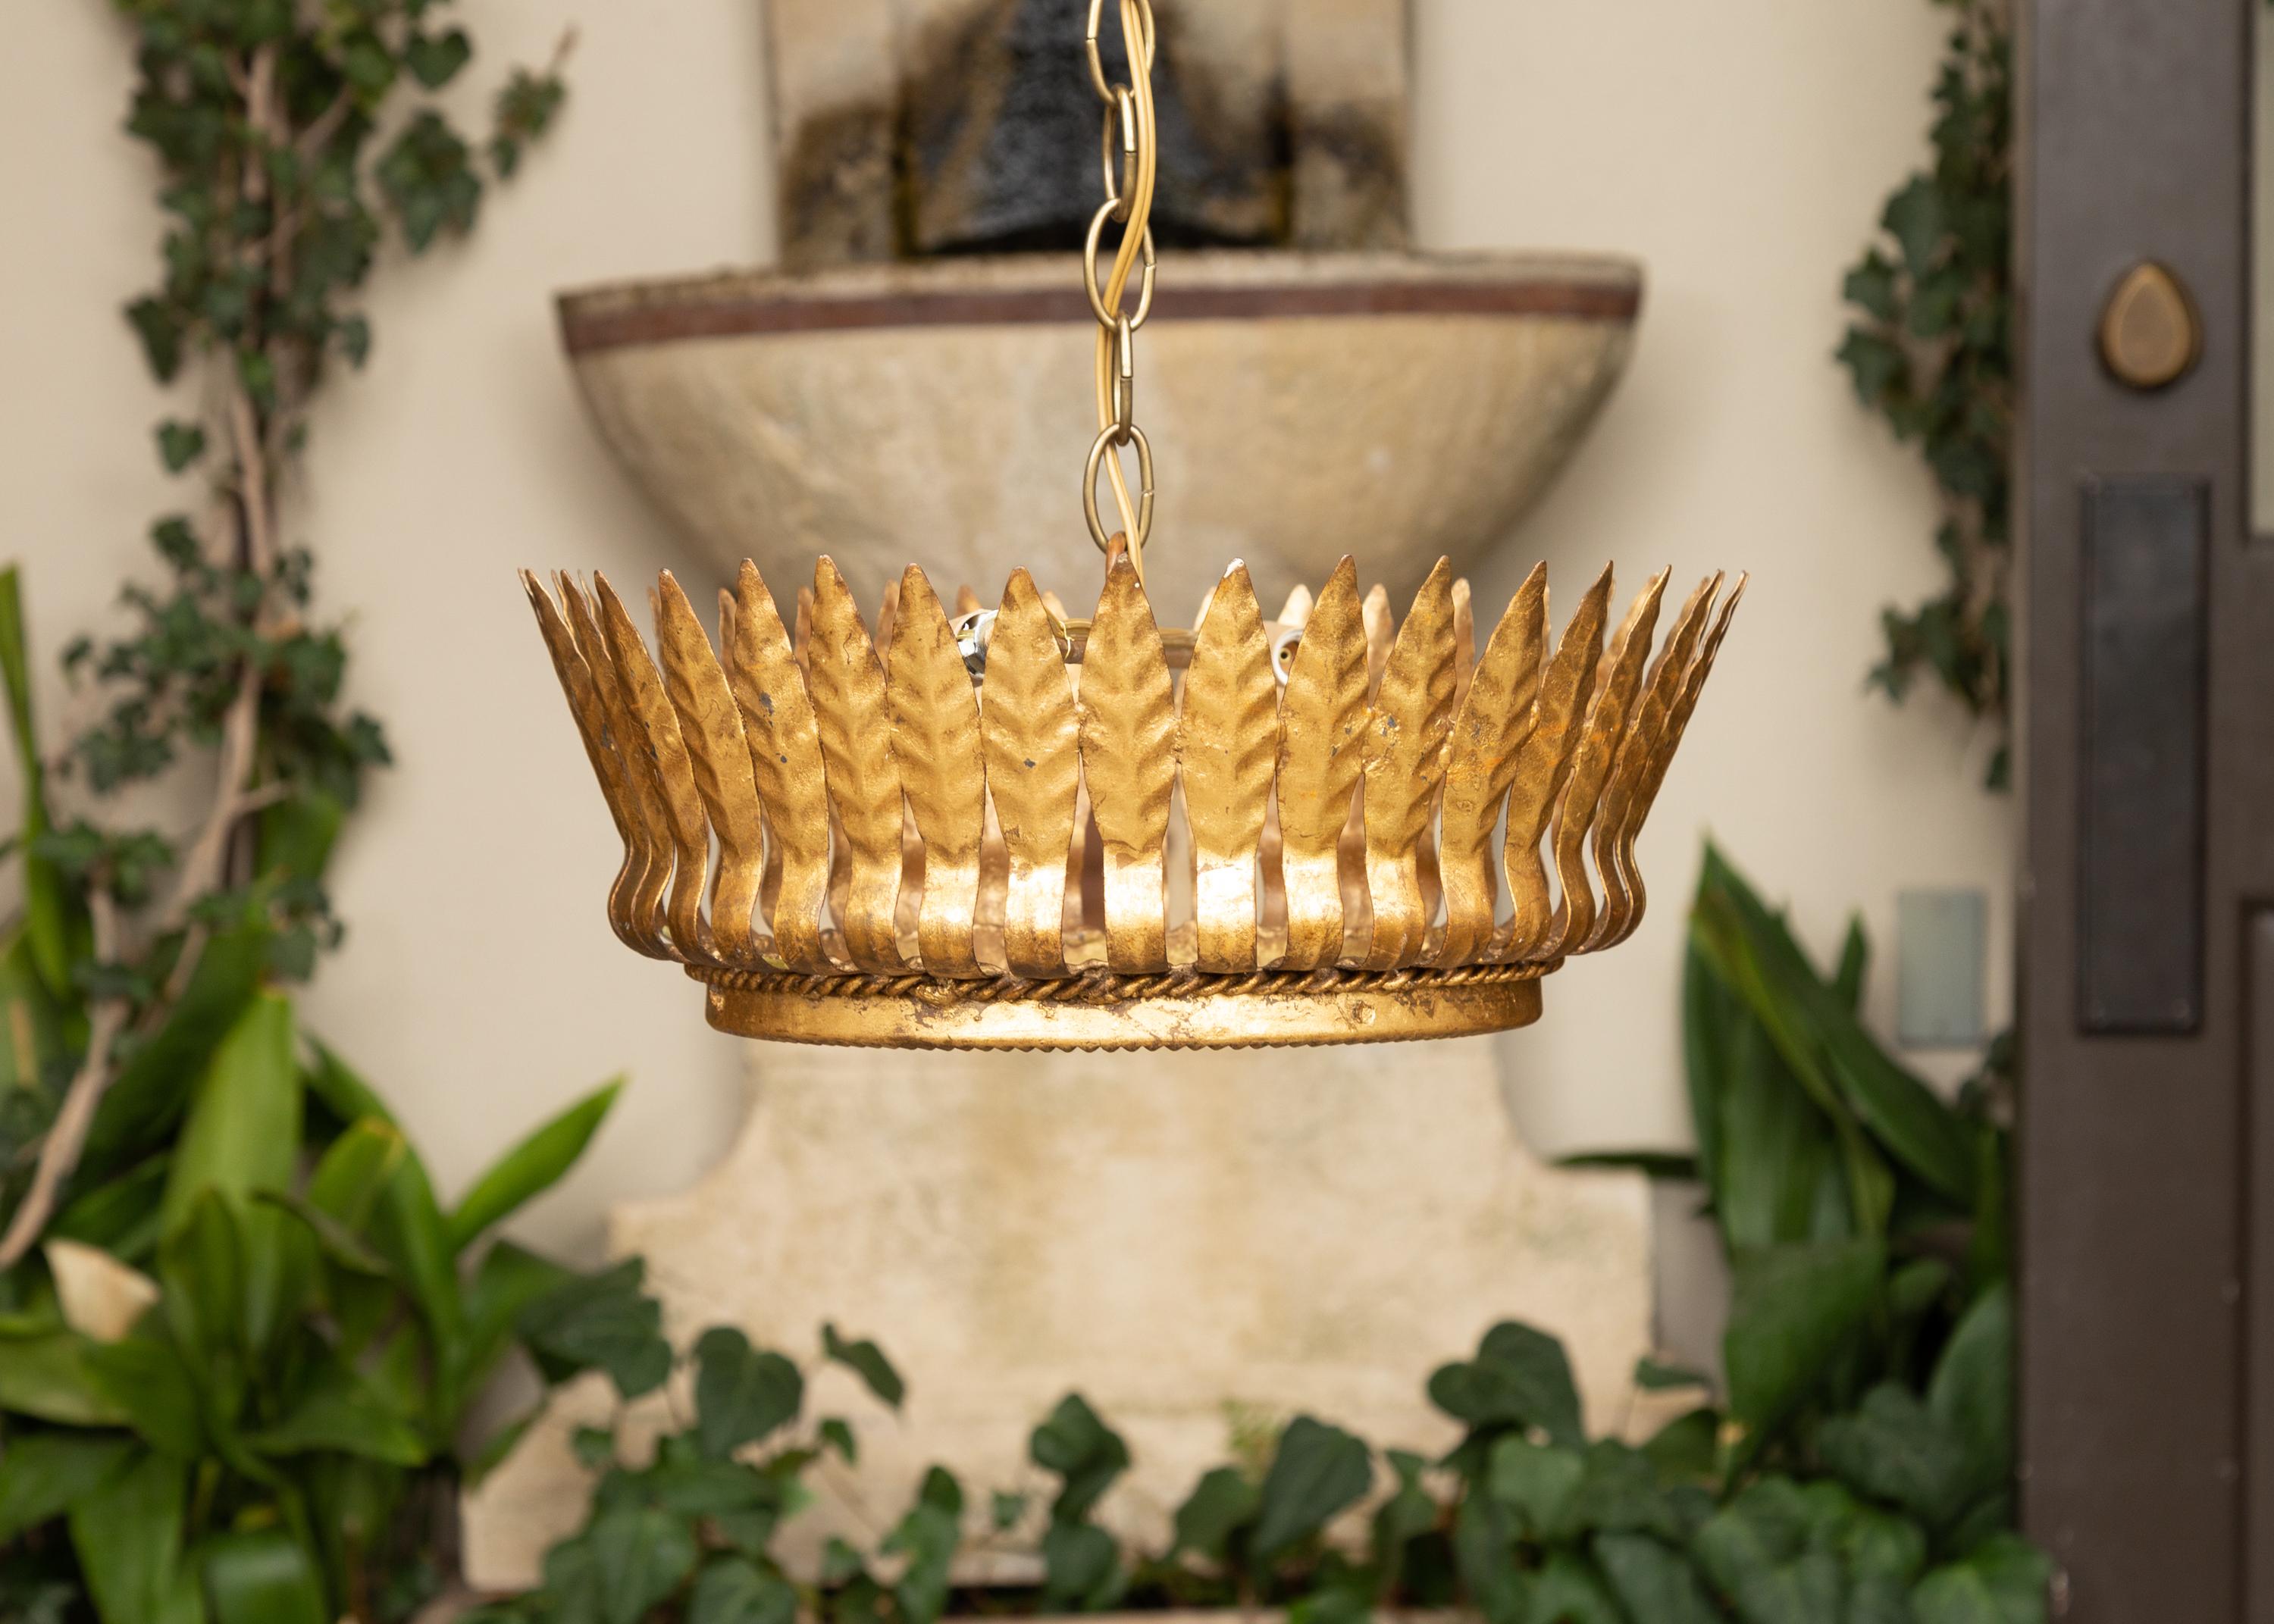 A Spanish gilt metal crown semi-flush chandelier from the mid-20th century with leaf motifs, two bulbs and frosted glass. Crafted in Spain during the midcentury period, this Spanish gilt metal chandelier is adorned with leaf motifs all the way